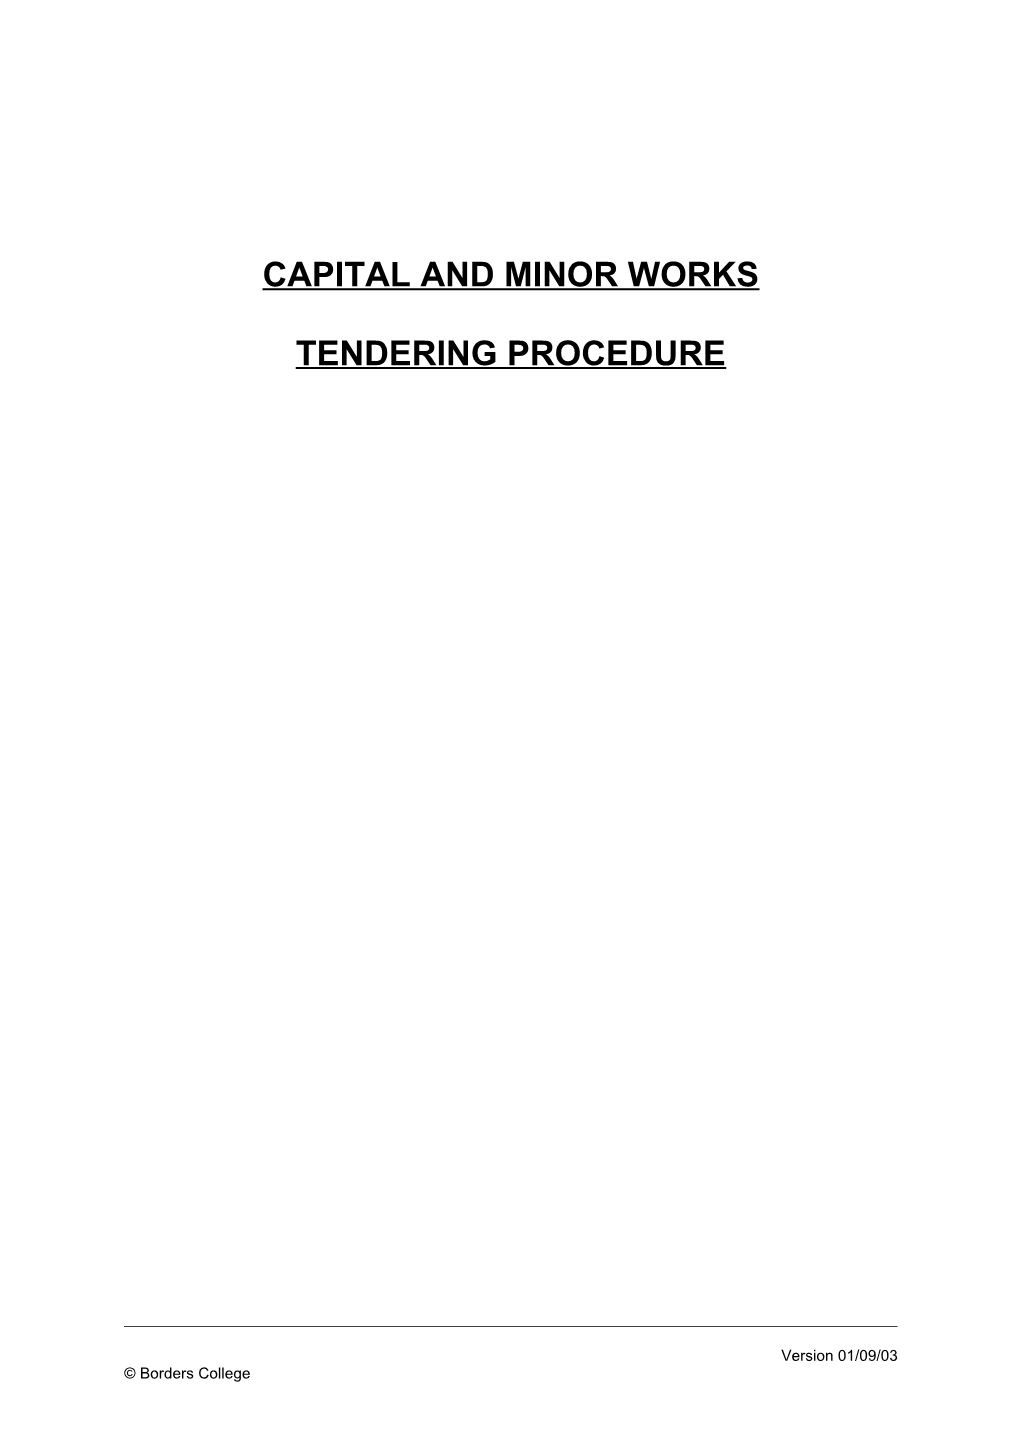 Capital and Minor Works